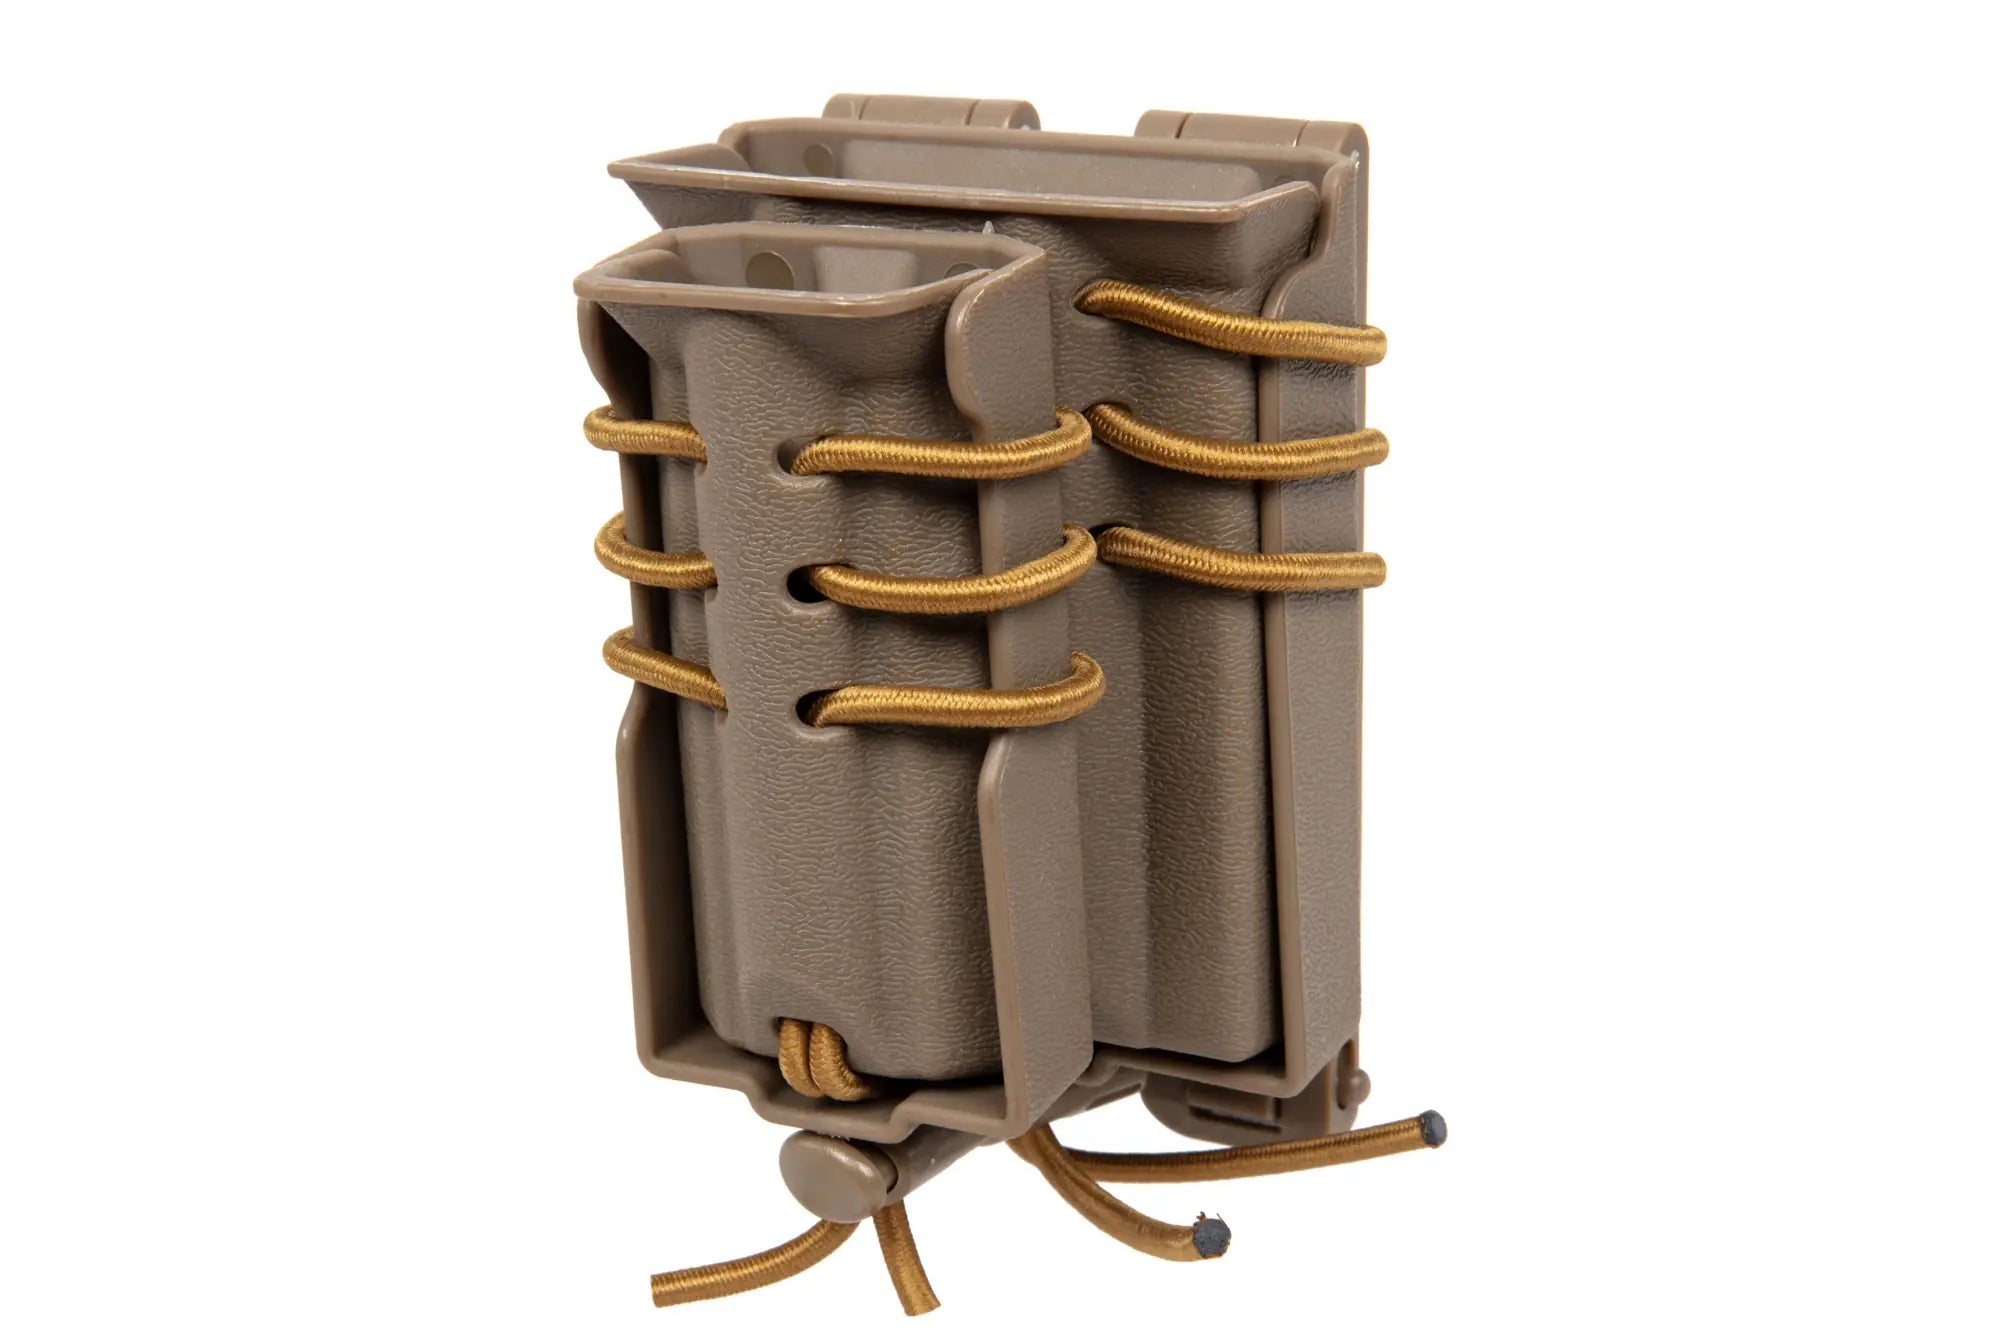 Carrier for 2 M4/M16 and 9mm magazines Wosport Urban Assault Quick Pull Tan